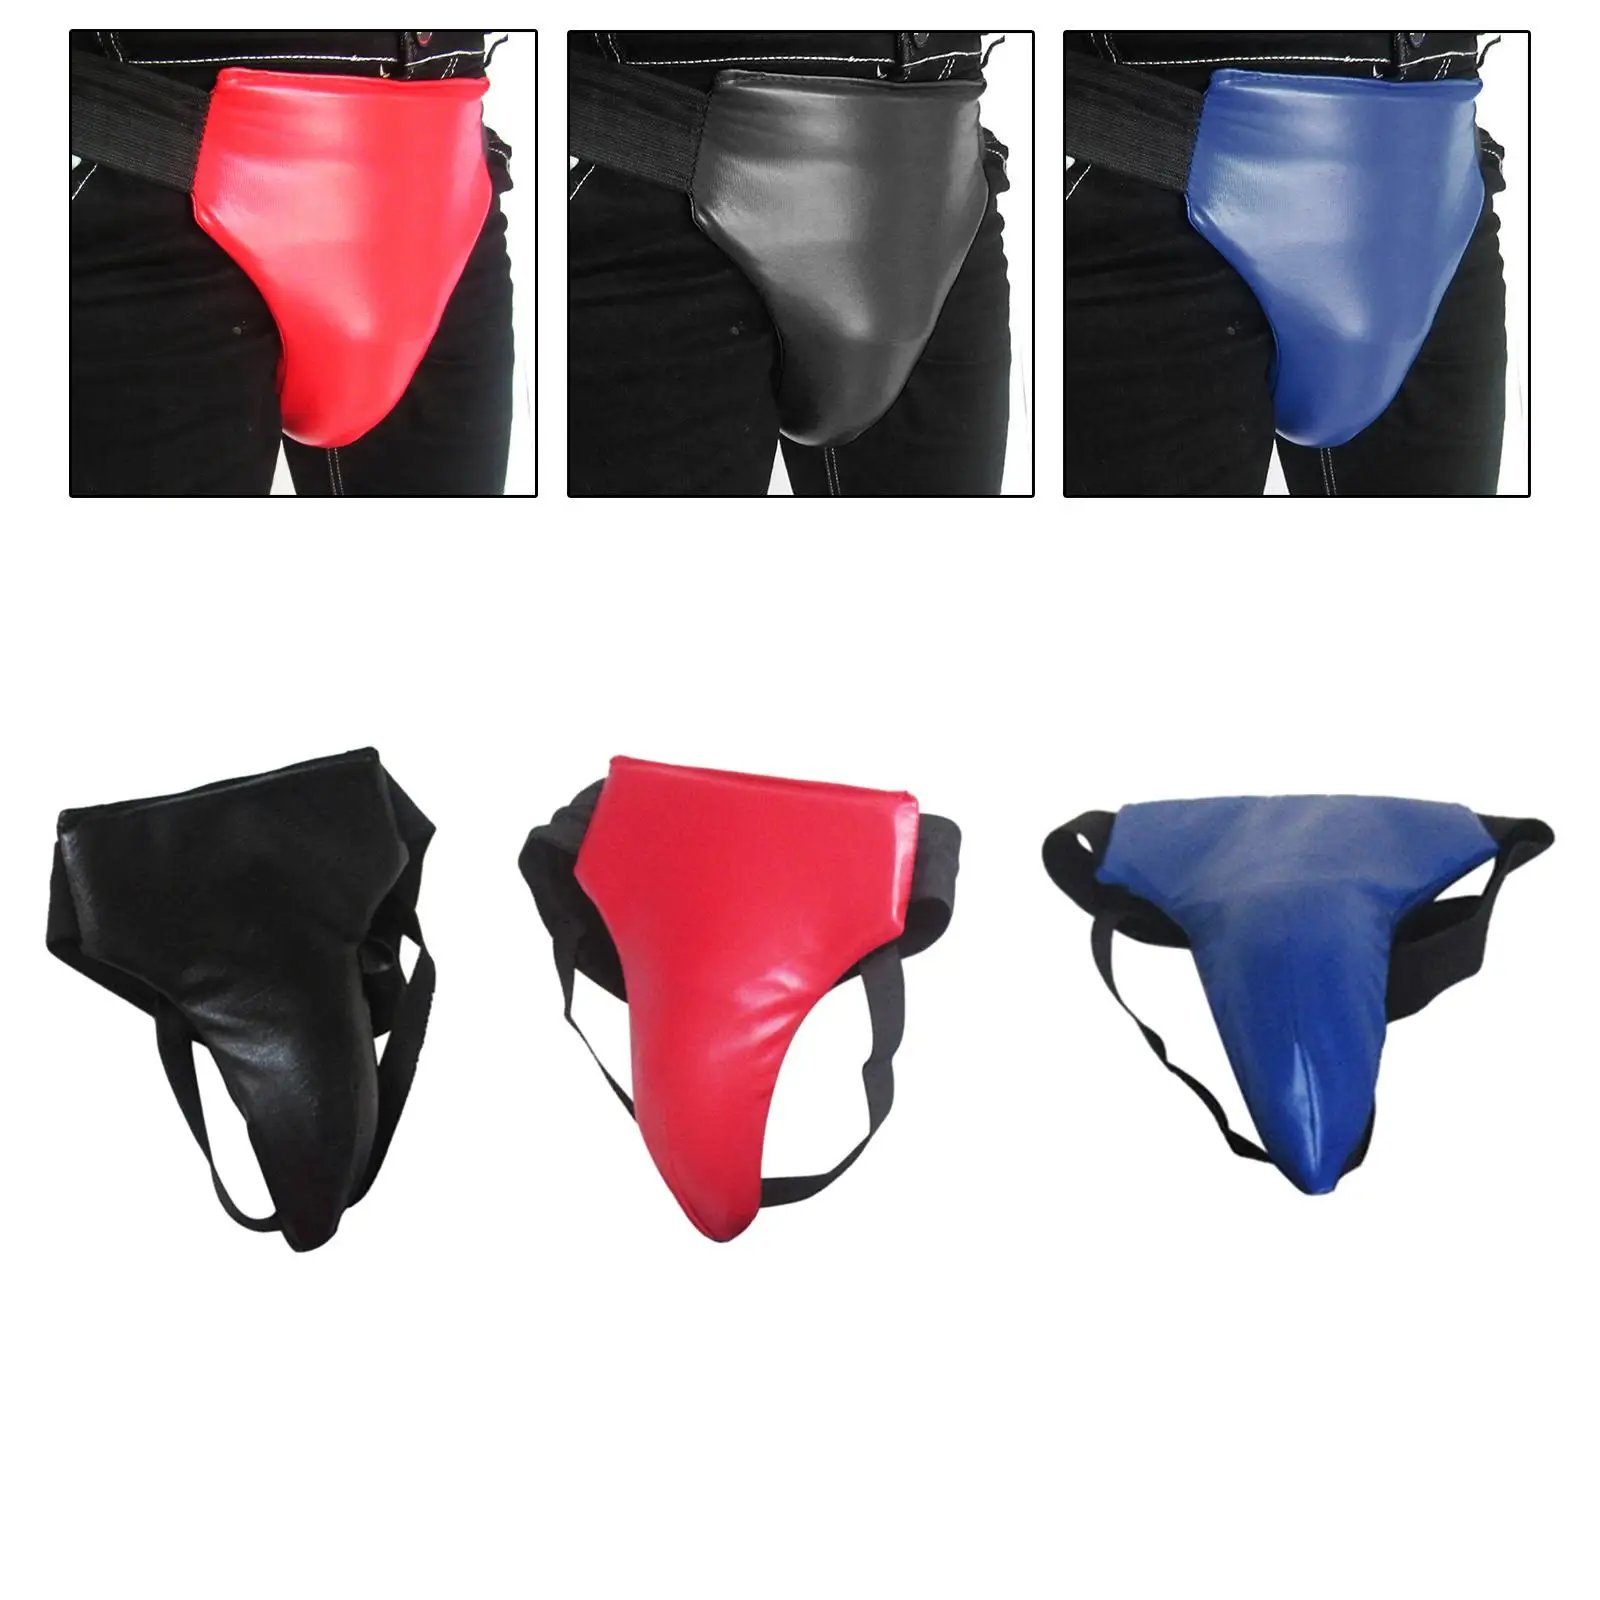 Boxing Groin Guard Training Equipment Jockstrap Support Groin Athletic Cup for Kickboxing Mma Training Kung Fu Sports Muay Thai